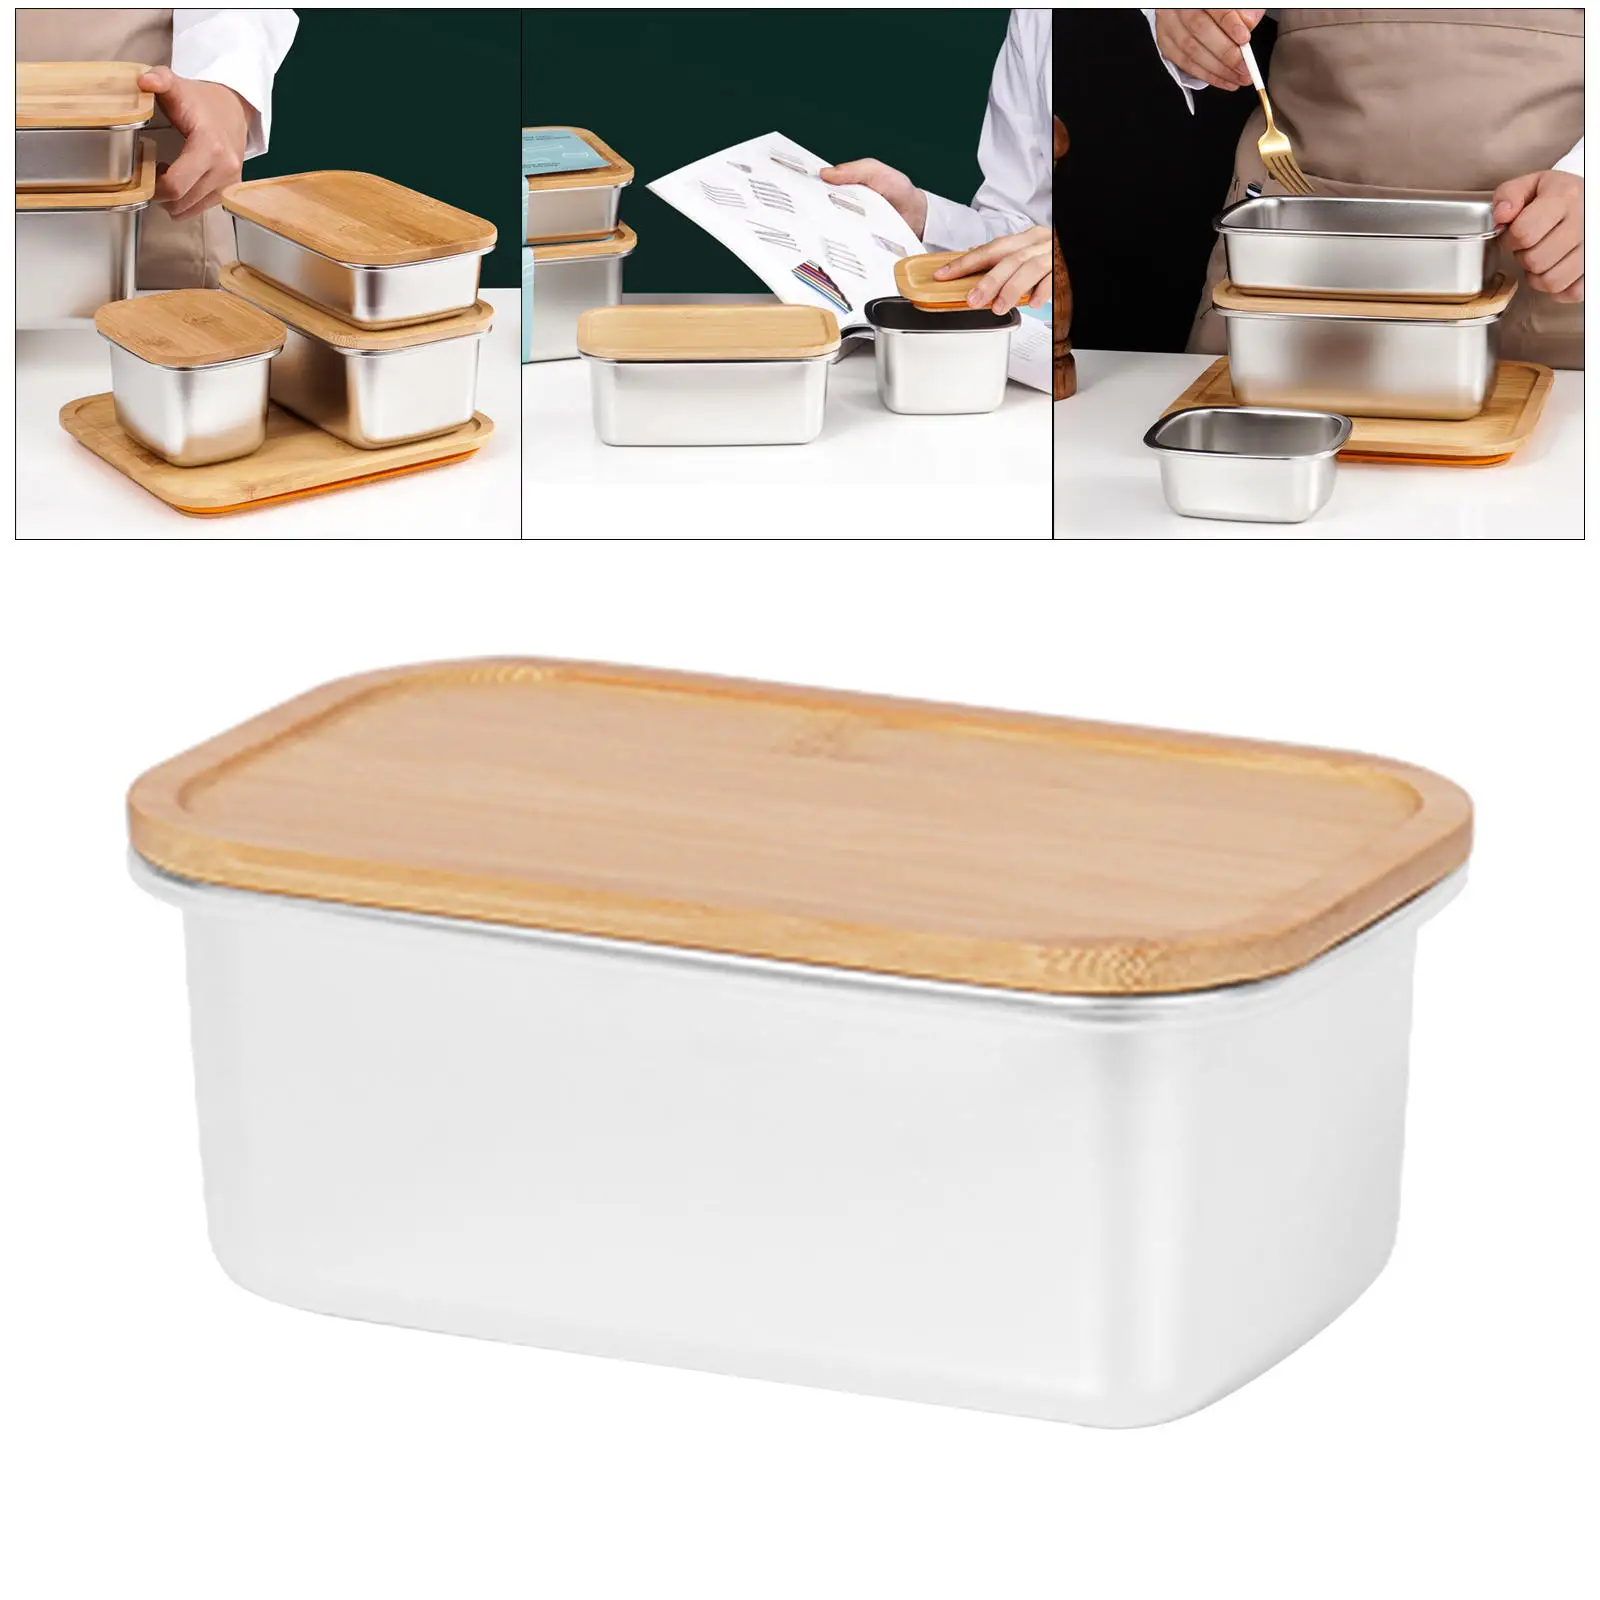 Portable Butter Box Dish With Wood Lid Holder Storage Container Wood Box Stainless Steel Tangent Kitchen Tools Covered Butter